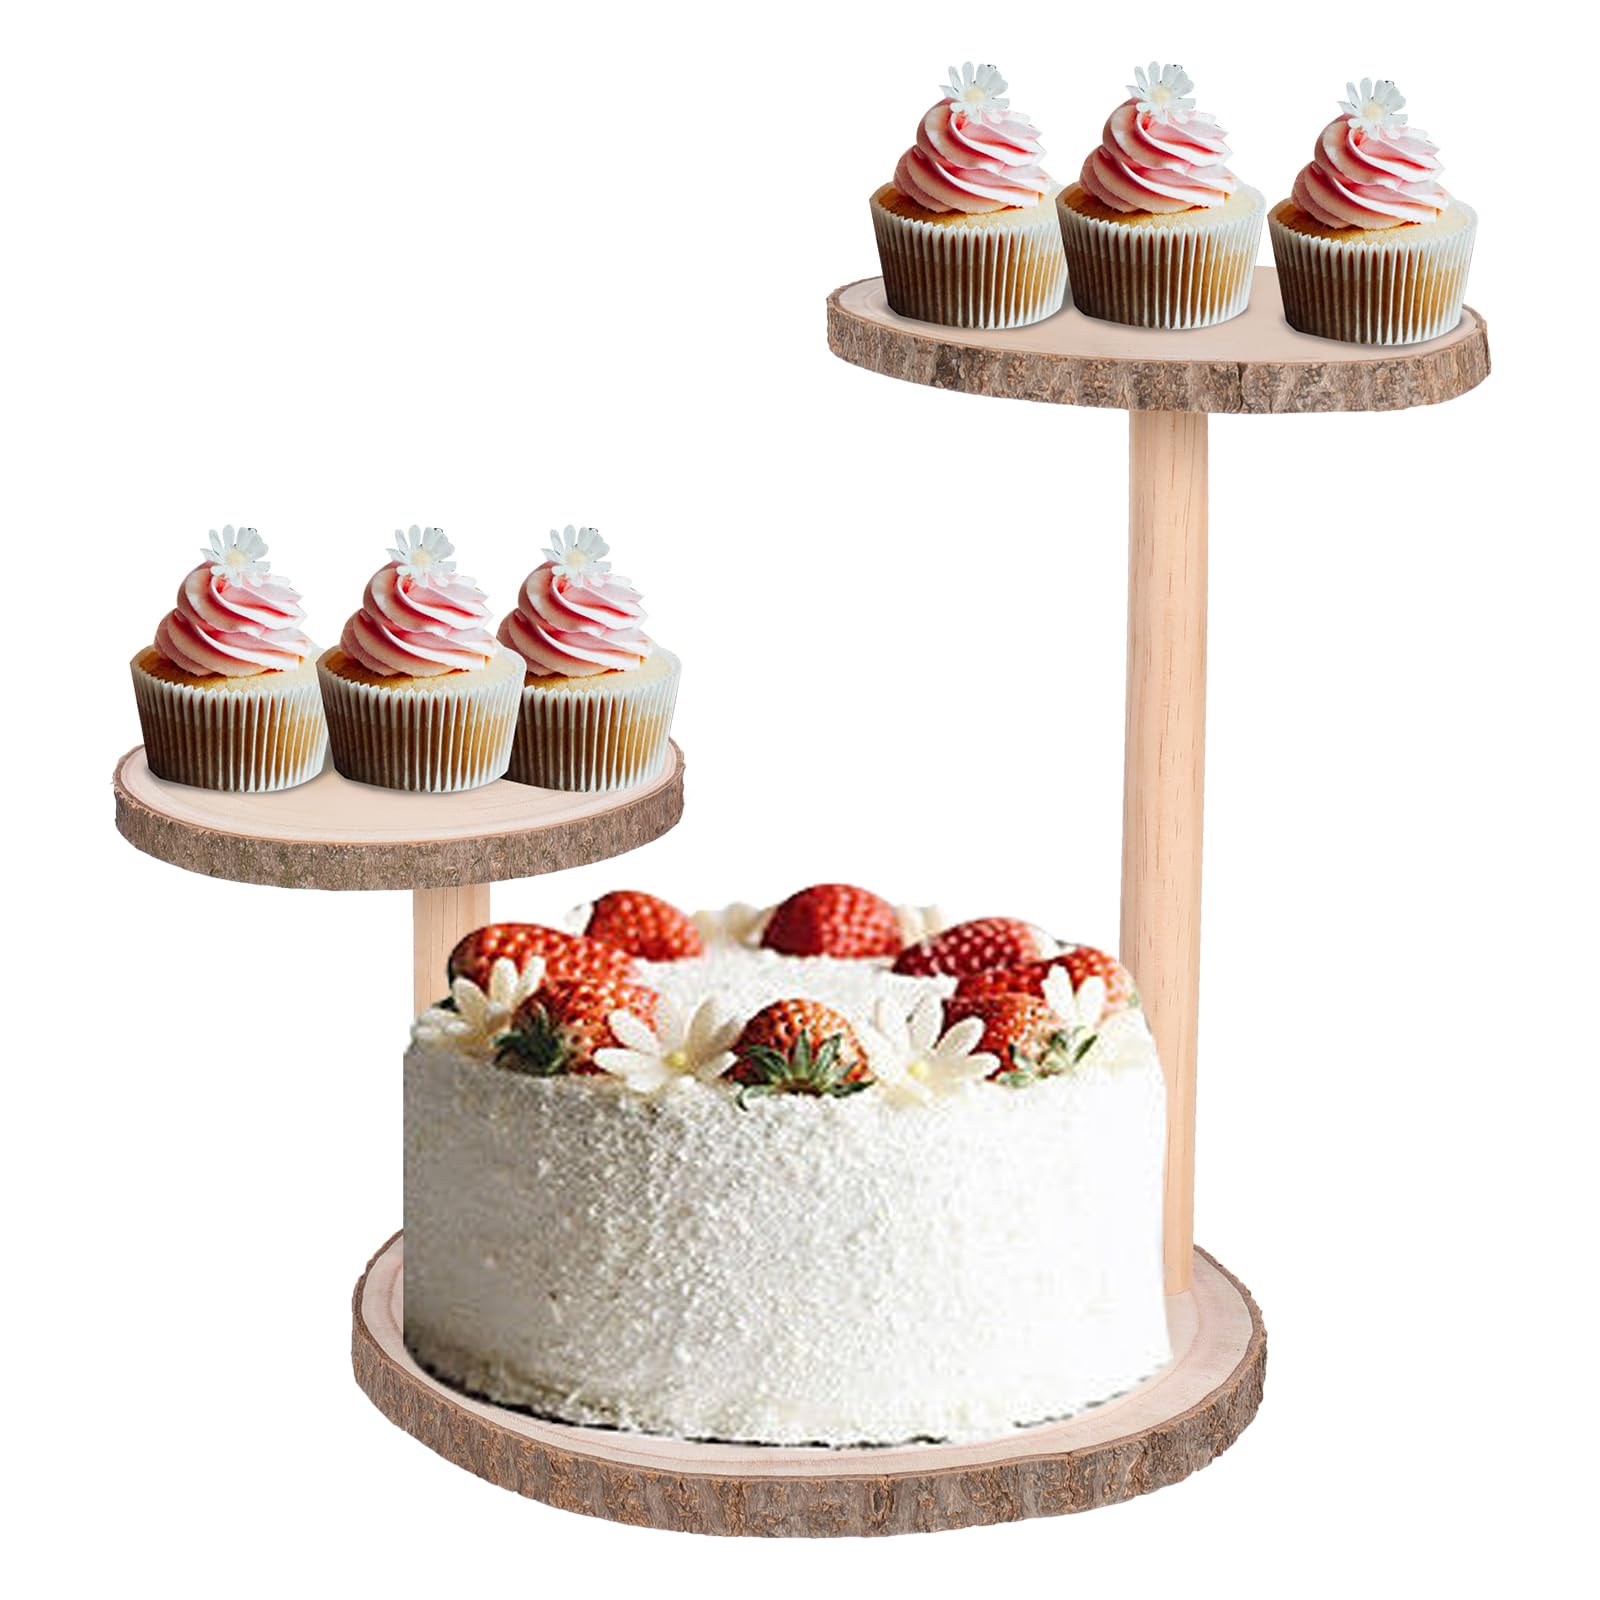 FORACKS 3 Tiered Cupcake Tower Stand Rustic Round Wooden Dessert Cake Dispaly Stands for Wedding, Birthday, Graduation, Tea Party for Thanksgiving